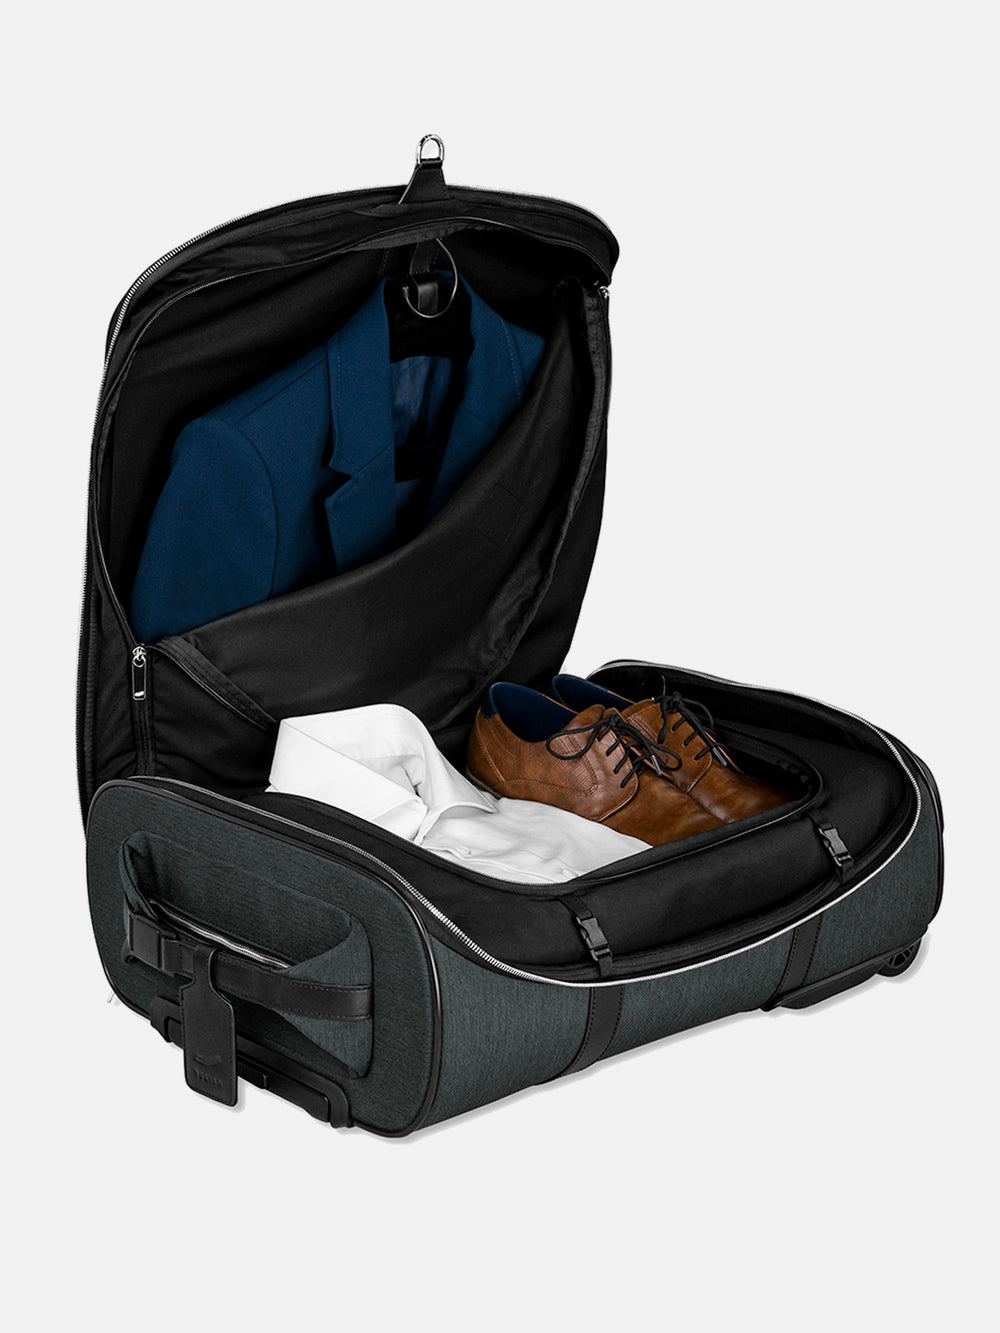 cp38 carry on luggage set with suit compartment